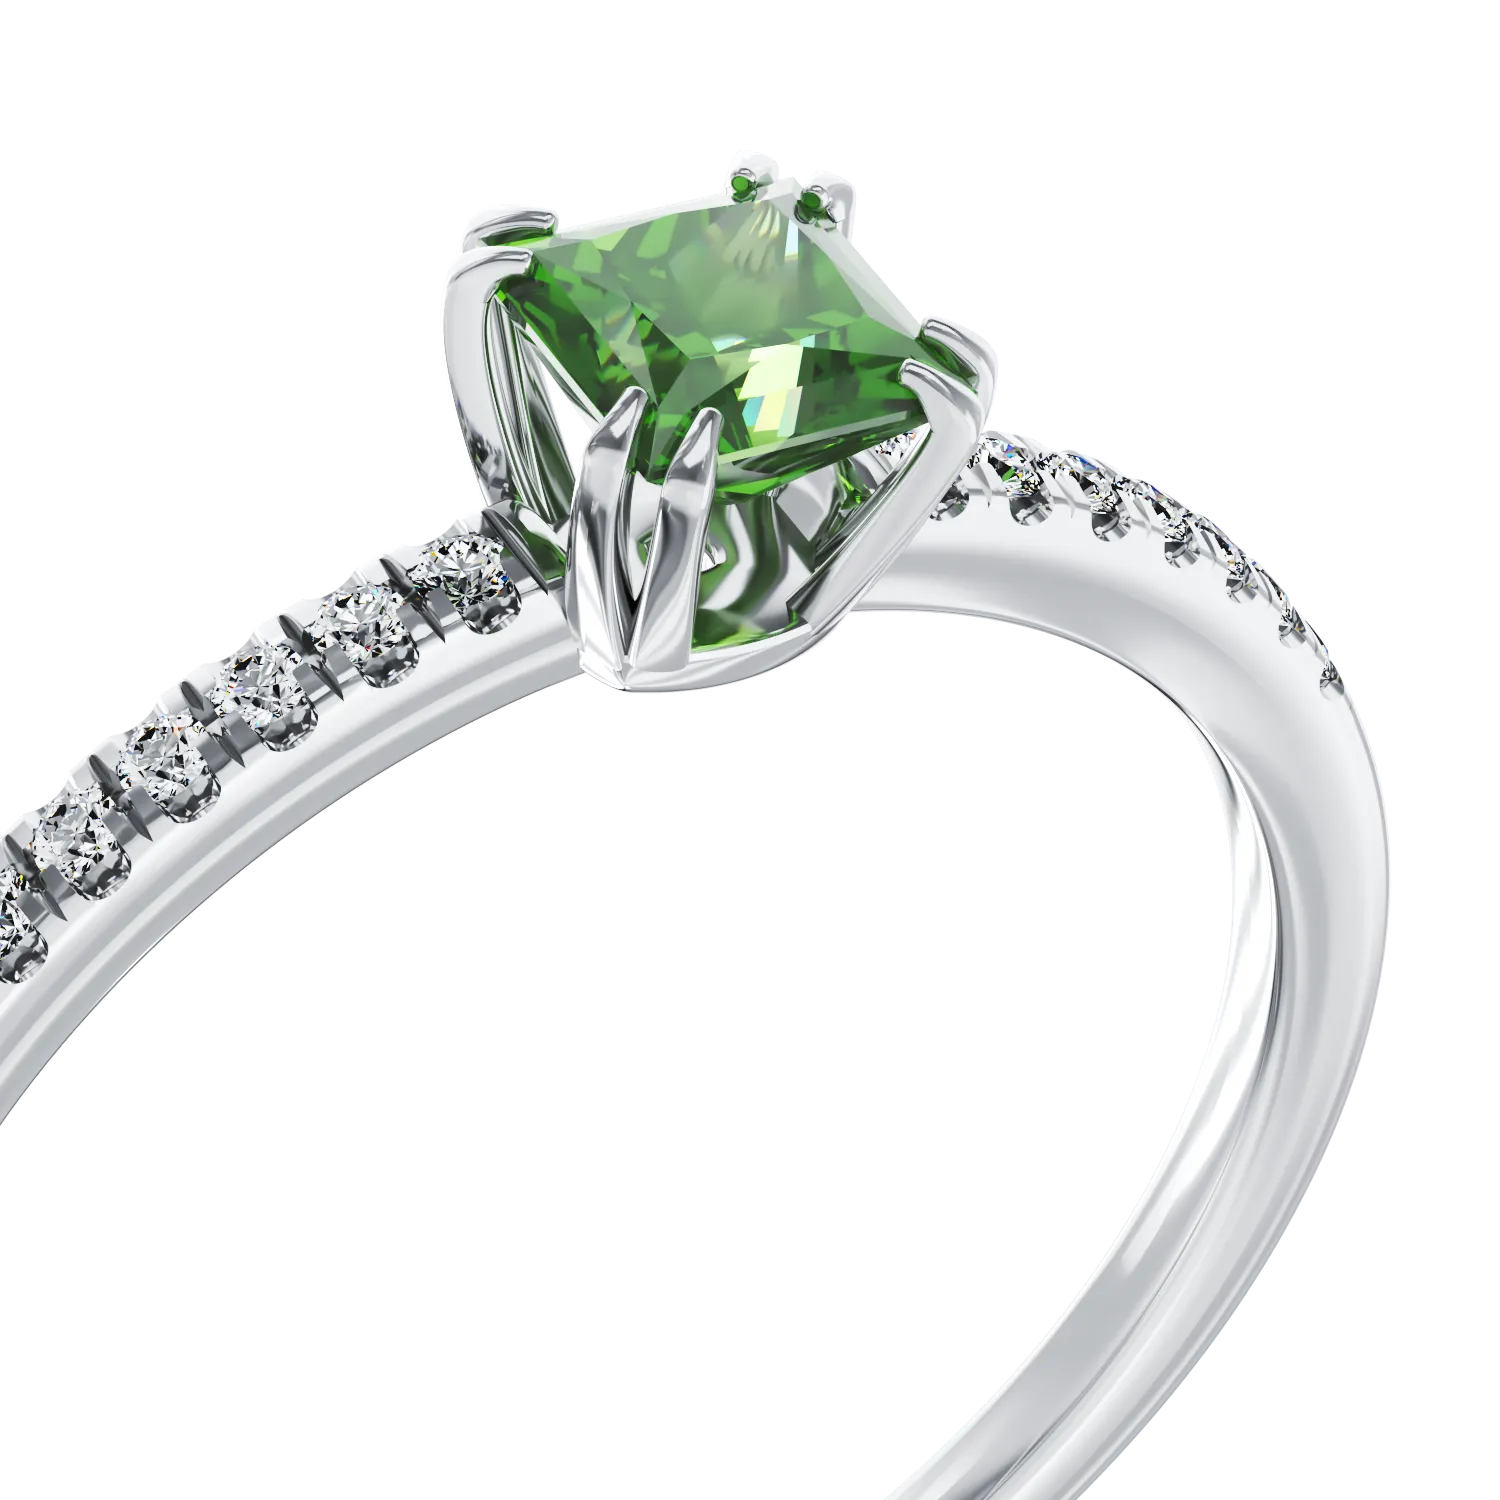 18K white gold engagement ring with 0.42ct chromediopsite and 0.05ct diamonds